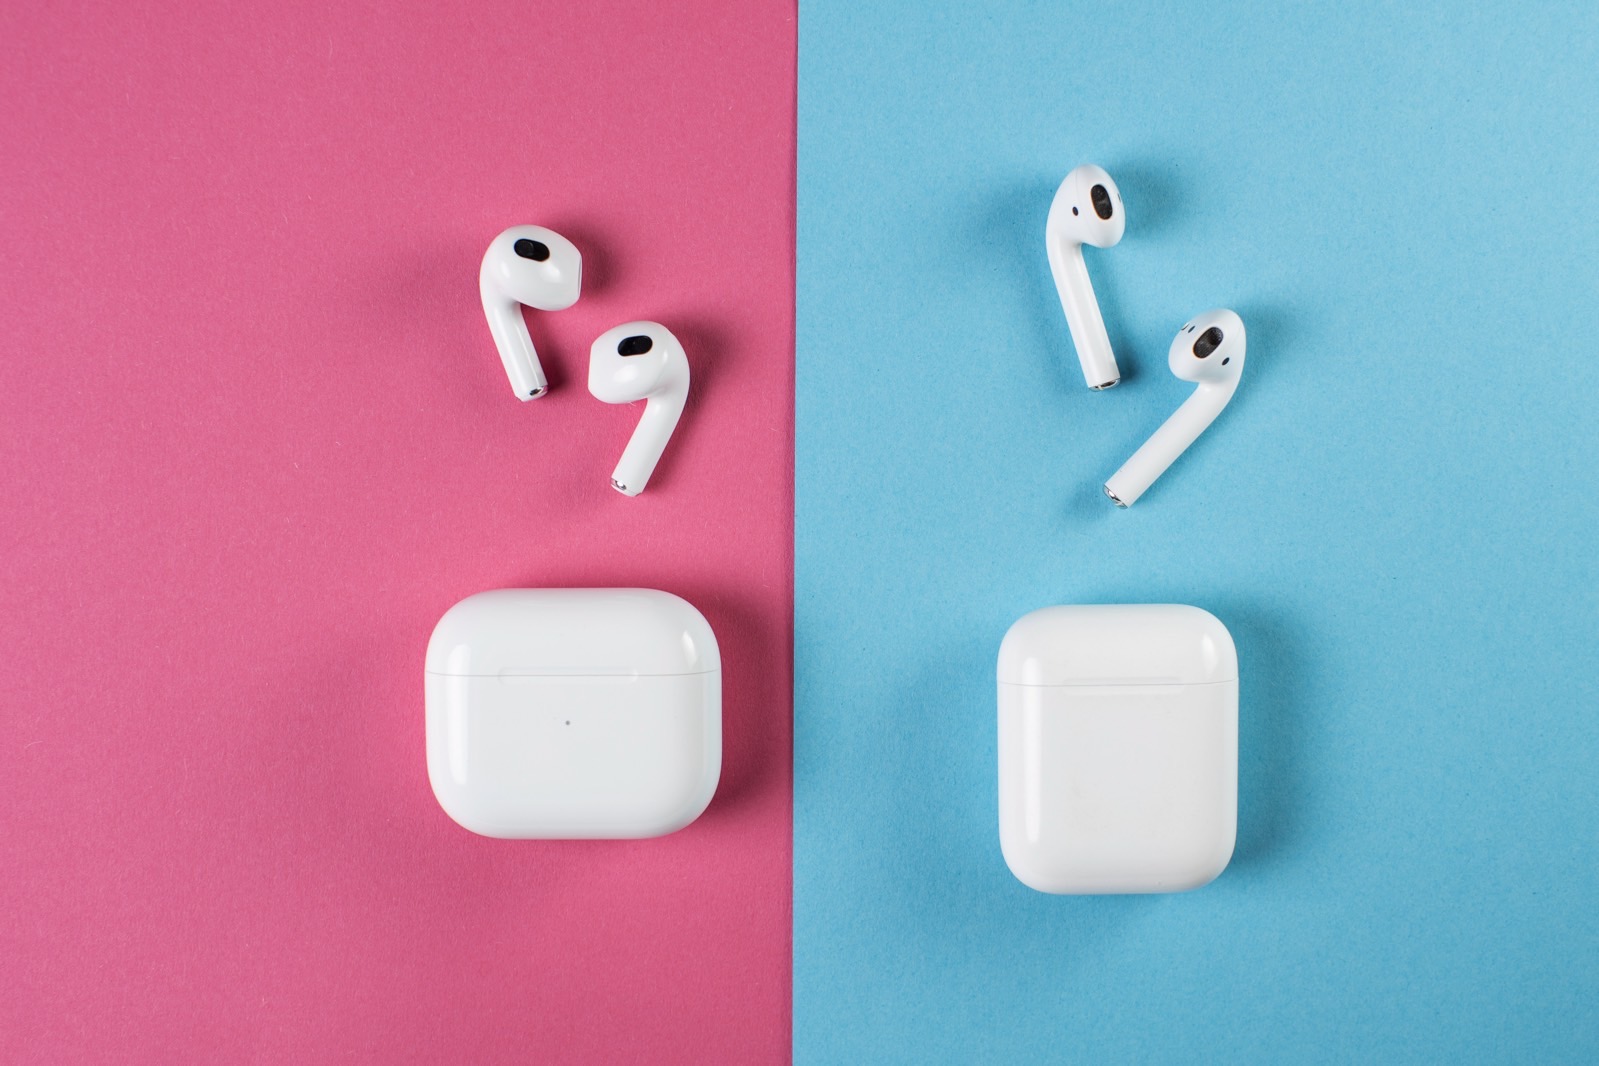 How to connect AirPods to iPhone, iPad, Mac, PC, and more